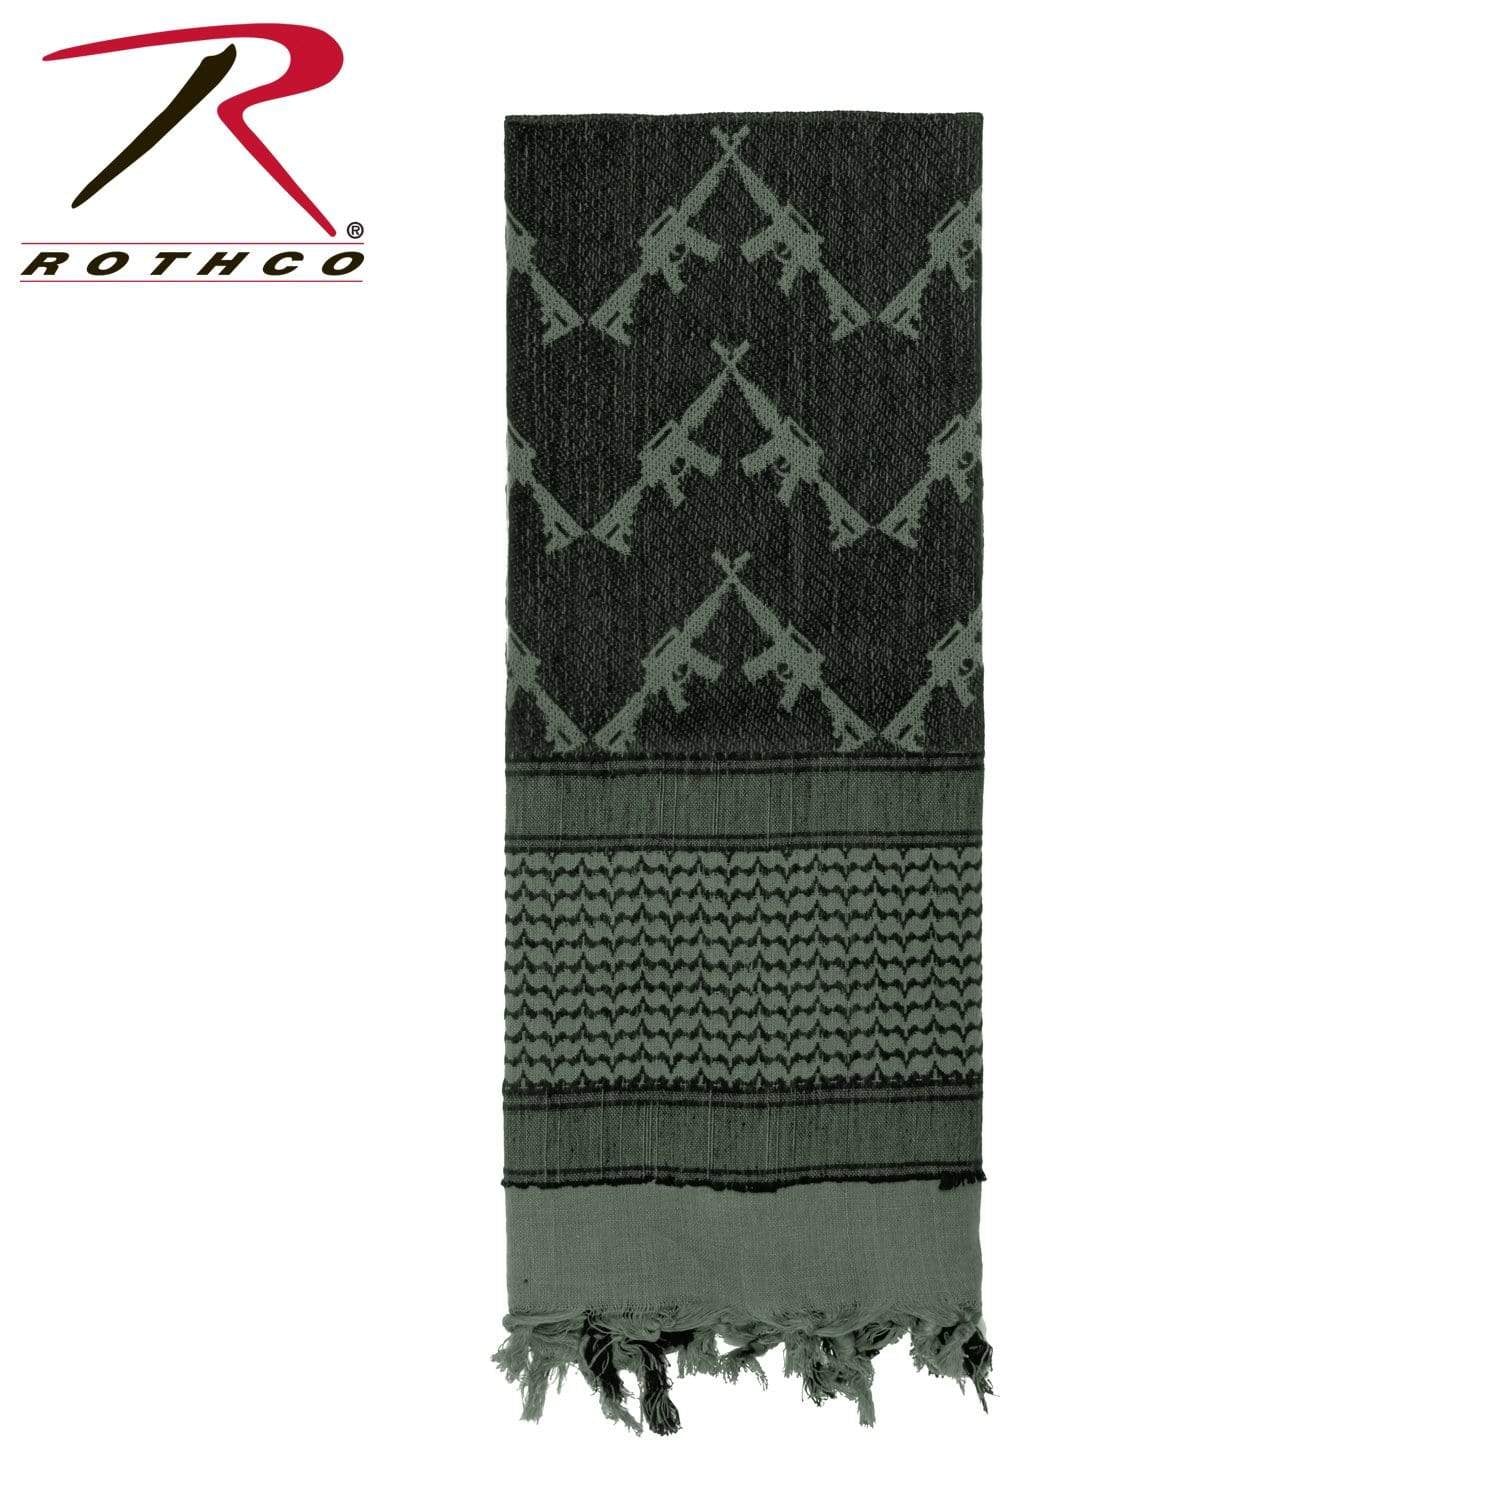 Rothco Crossed Rifles Shemagh Tactical Desert Keffiyeh Scarf - Foliage Green - Eminent Paintball And Airsoft